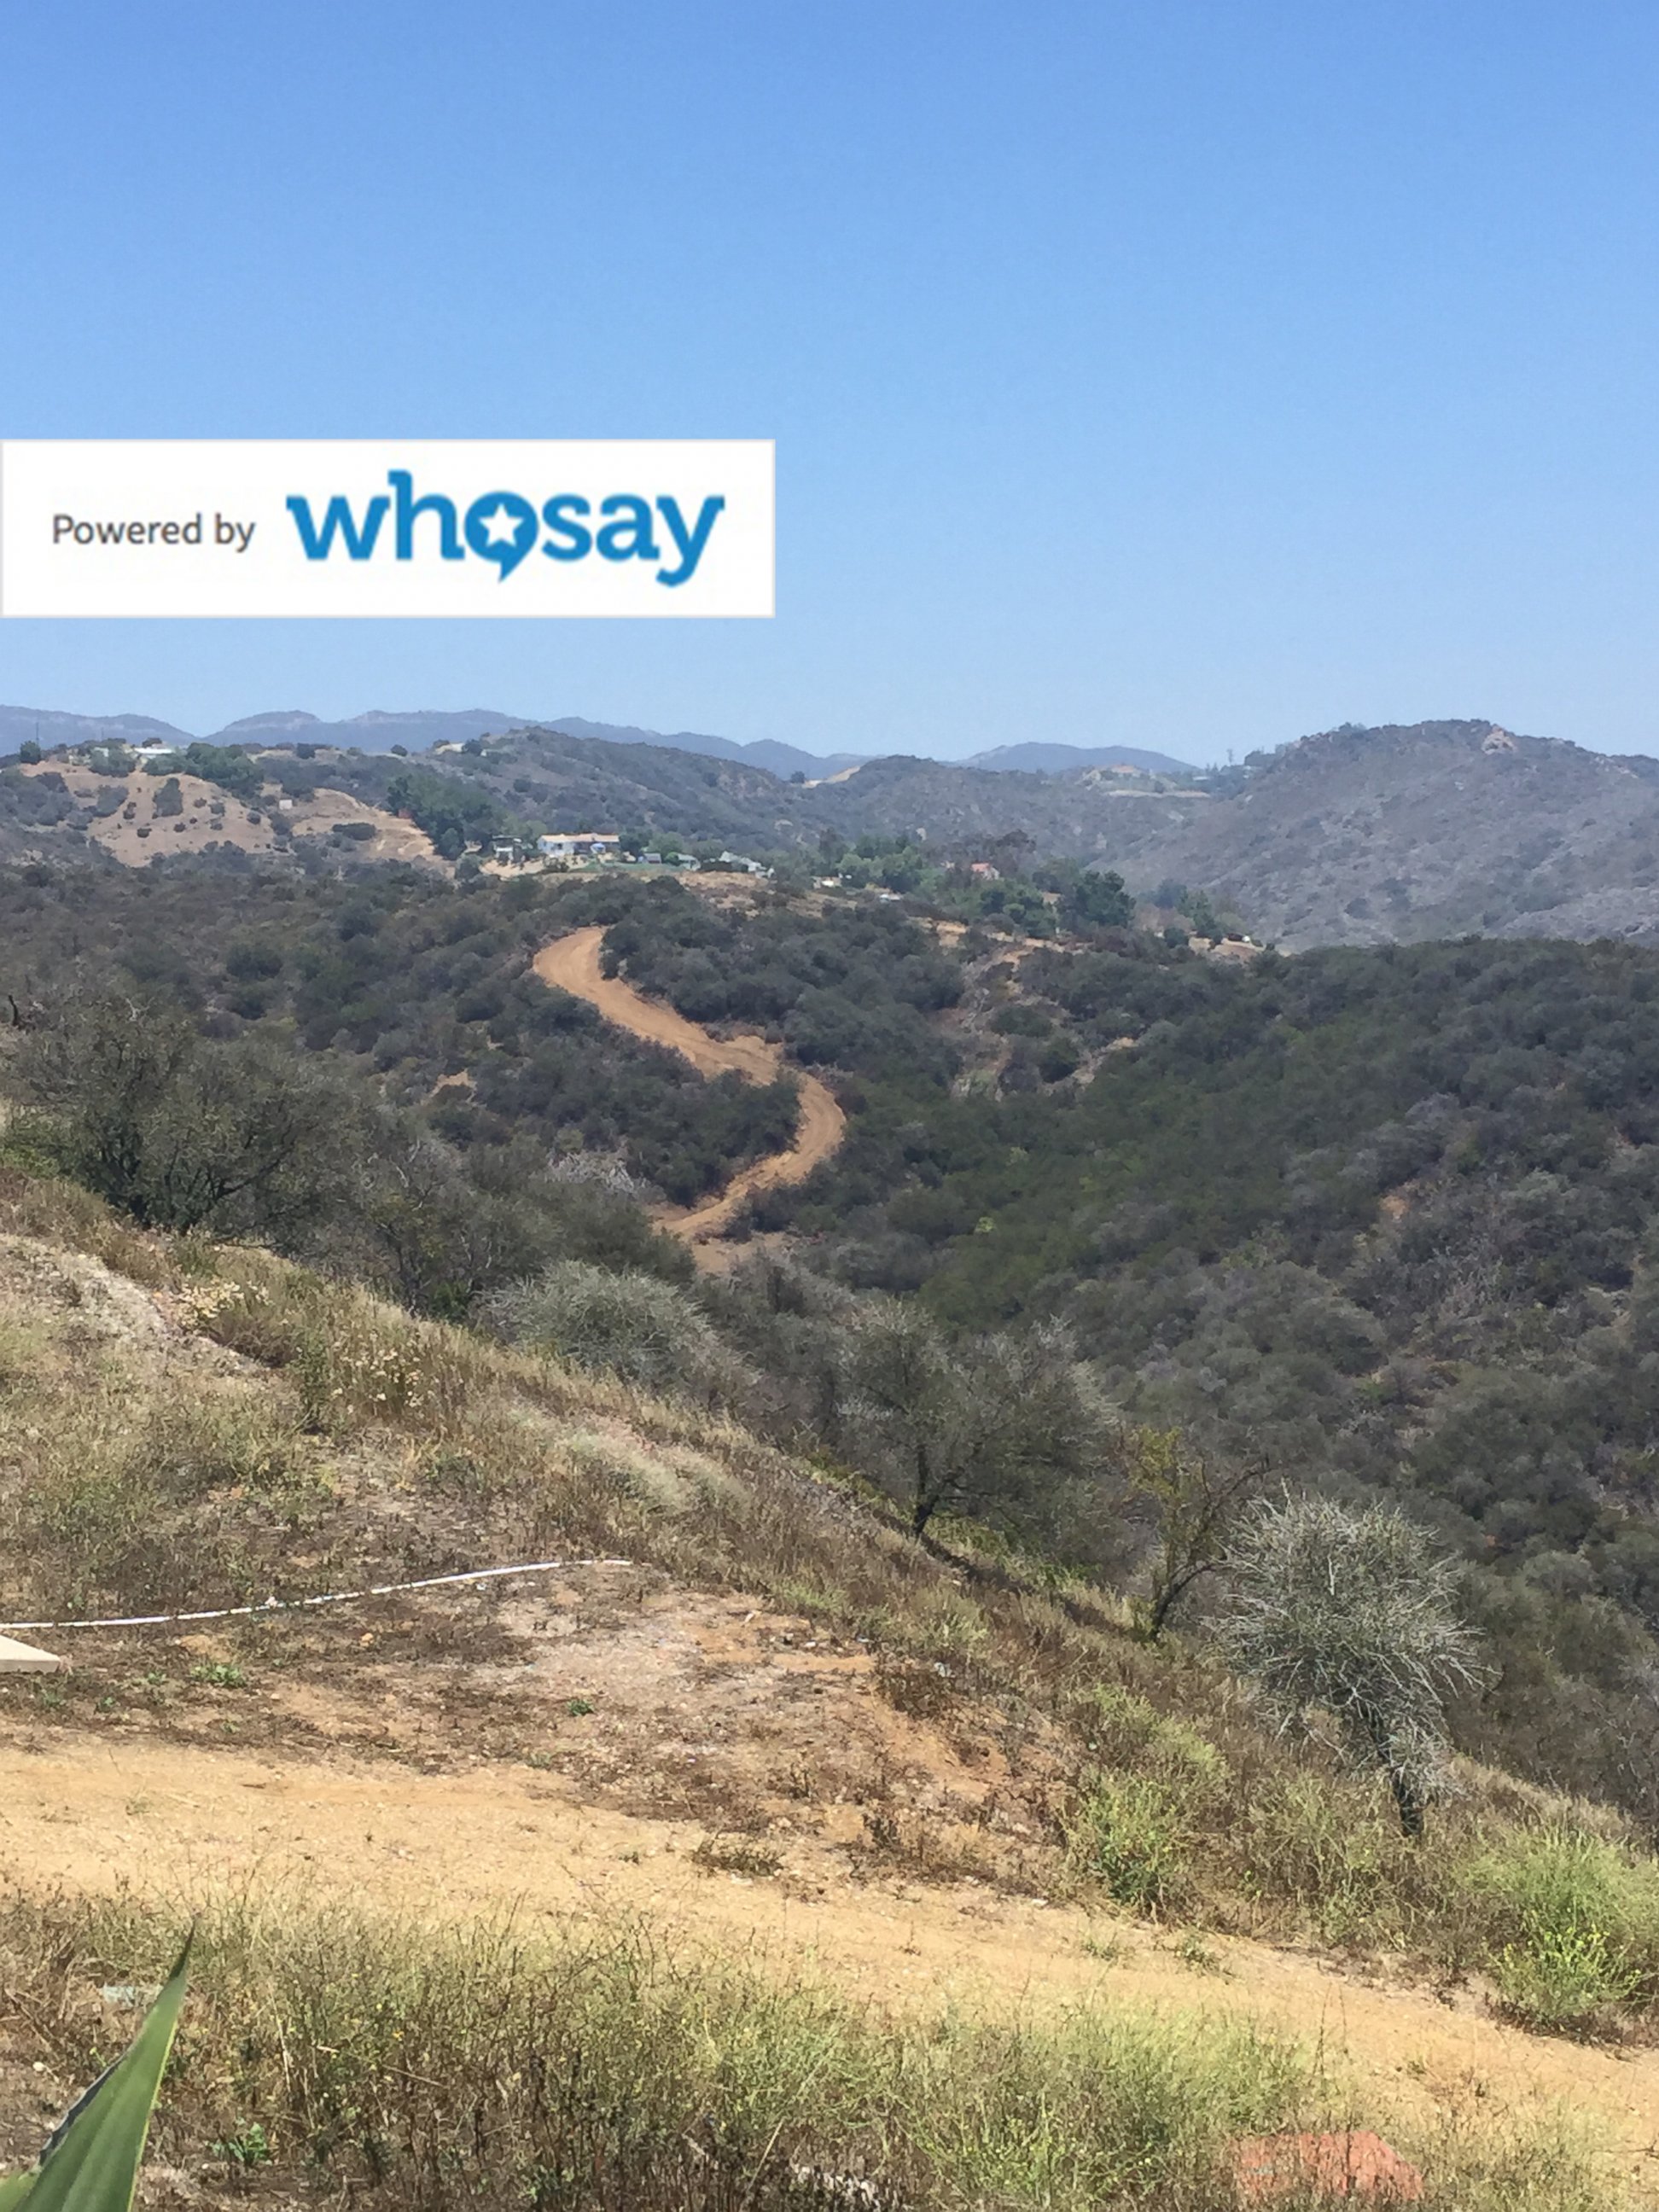 PHOTO: Caitlyn Jenner took a photo from her house and blogs about her future through whosay.